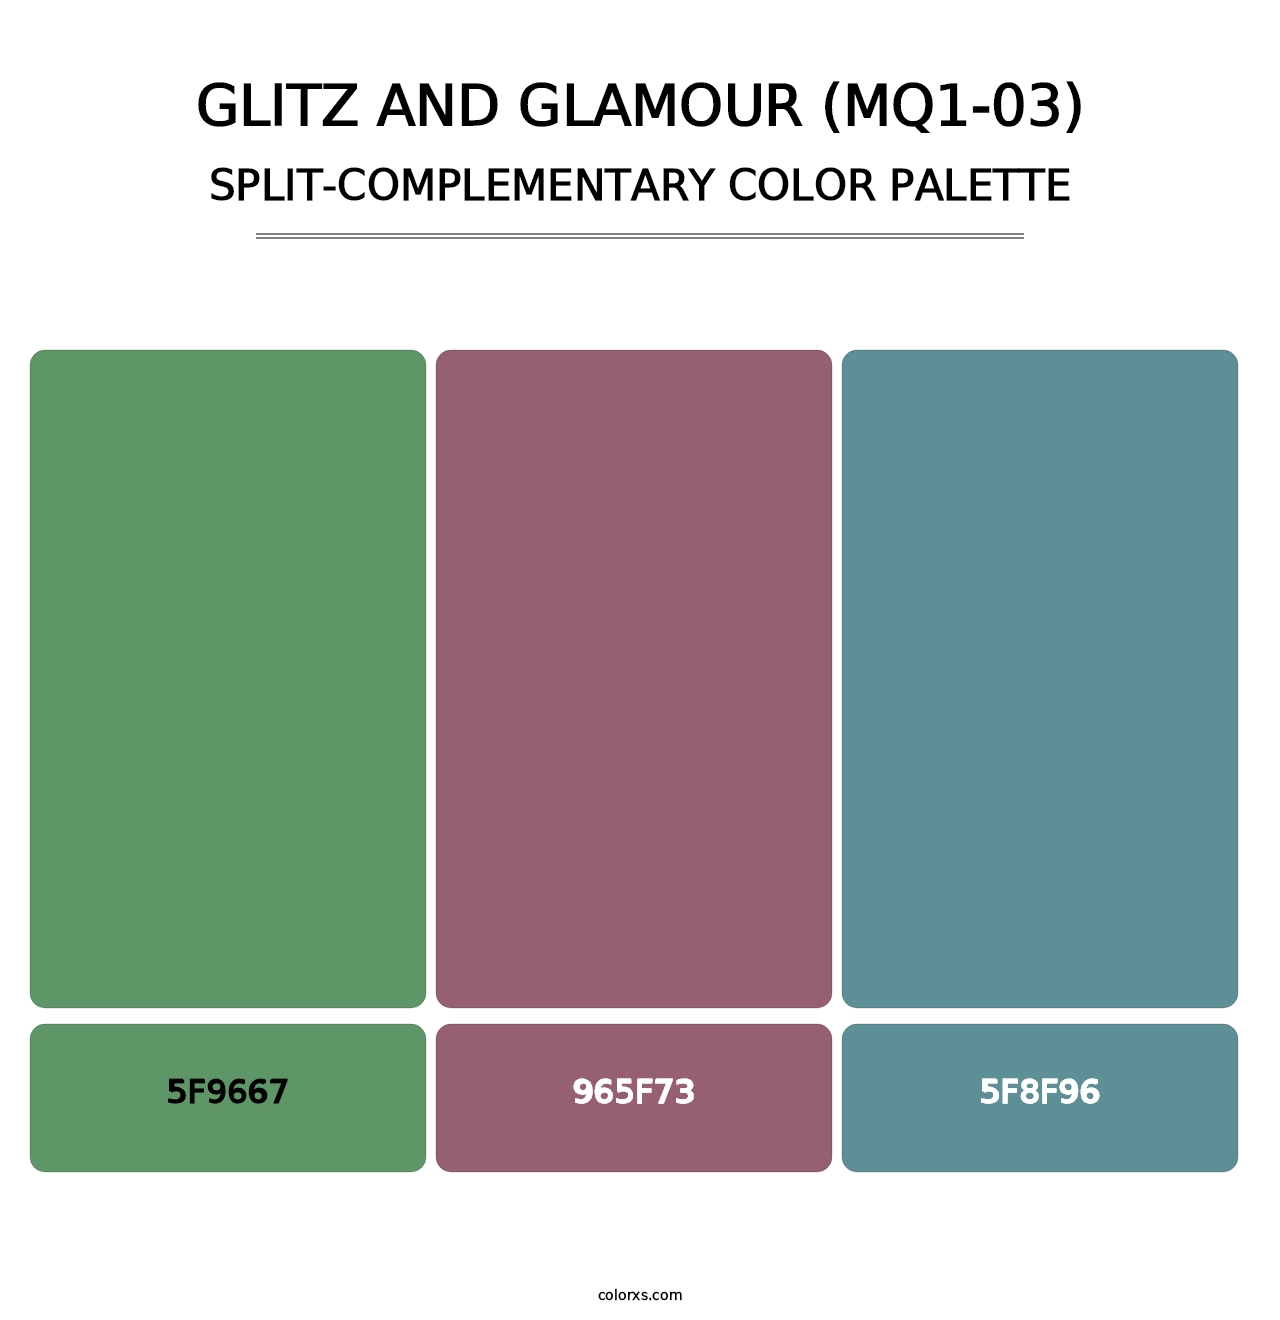 Glitz And Glamour (MQ1-03) - Split-Complementary Color Palette